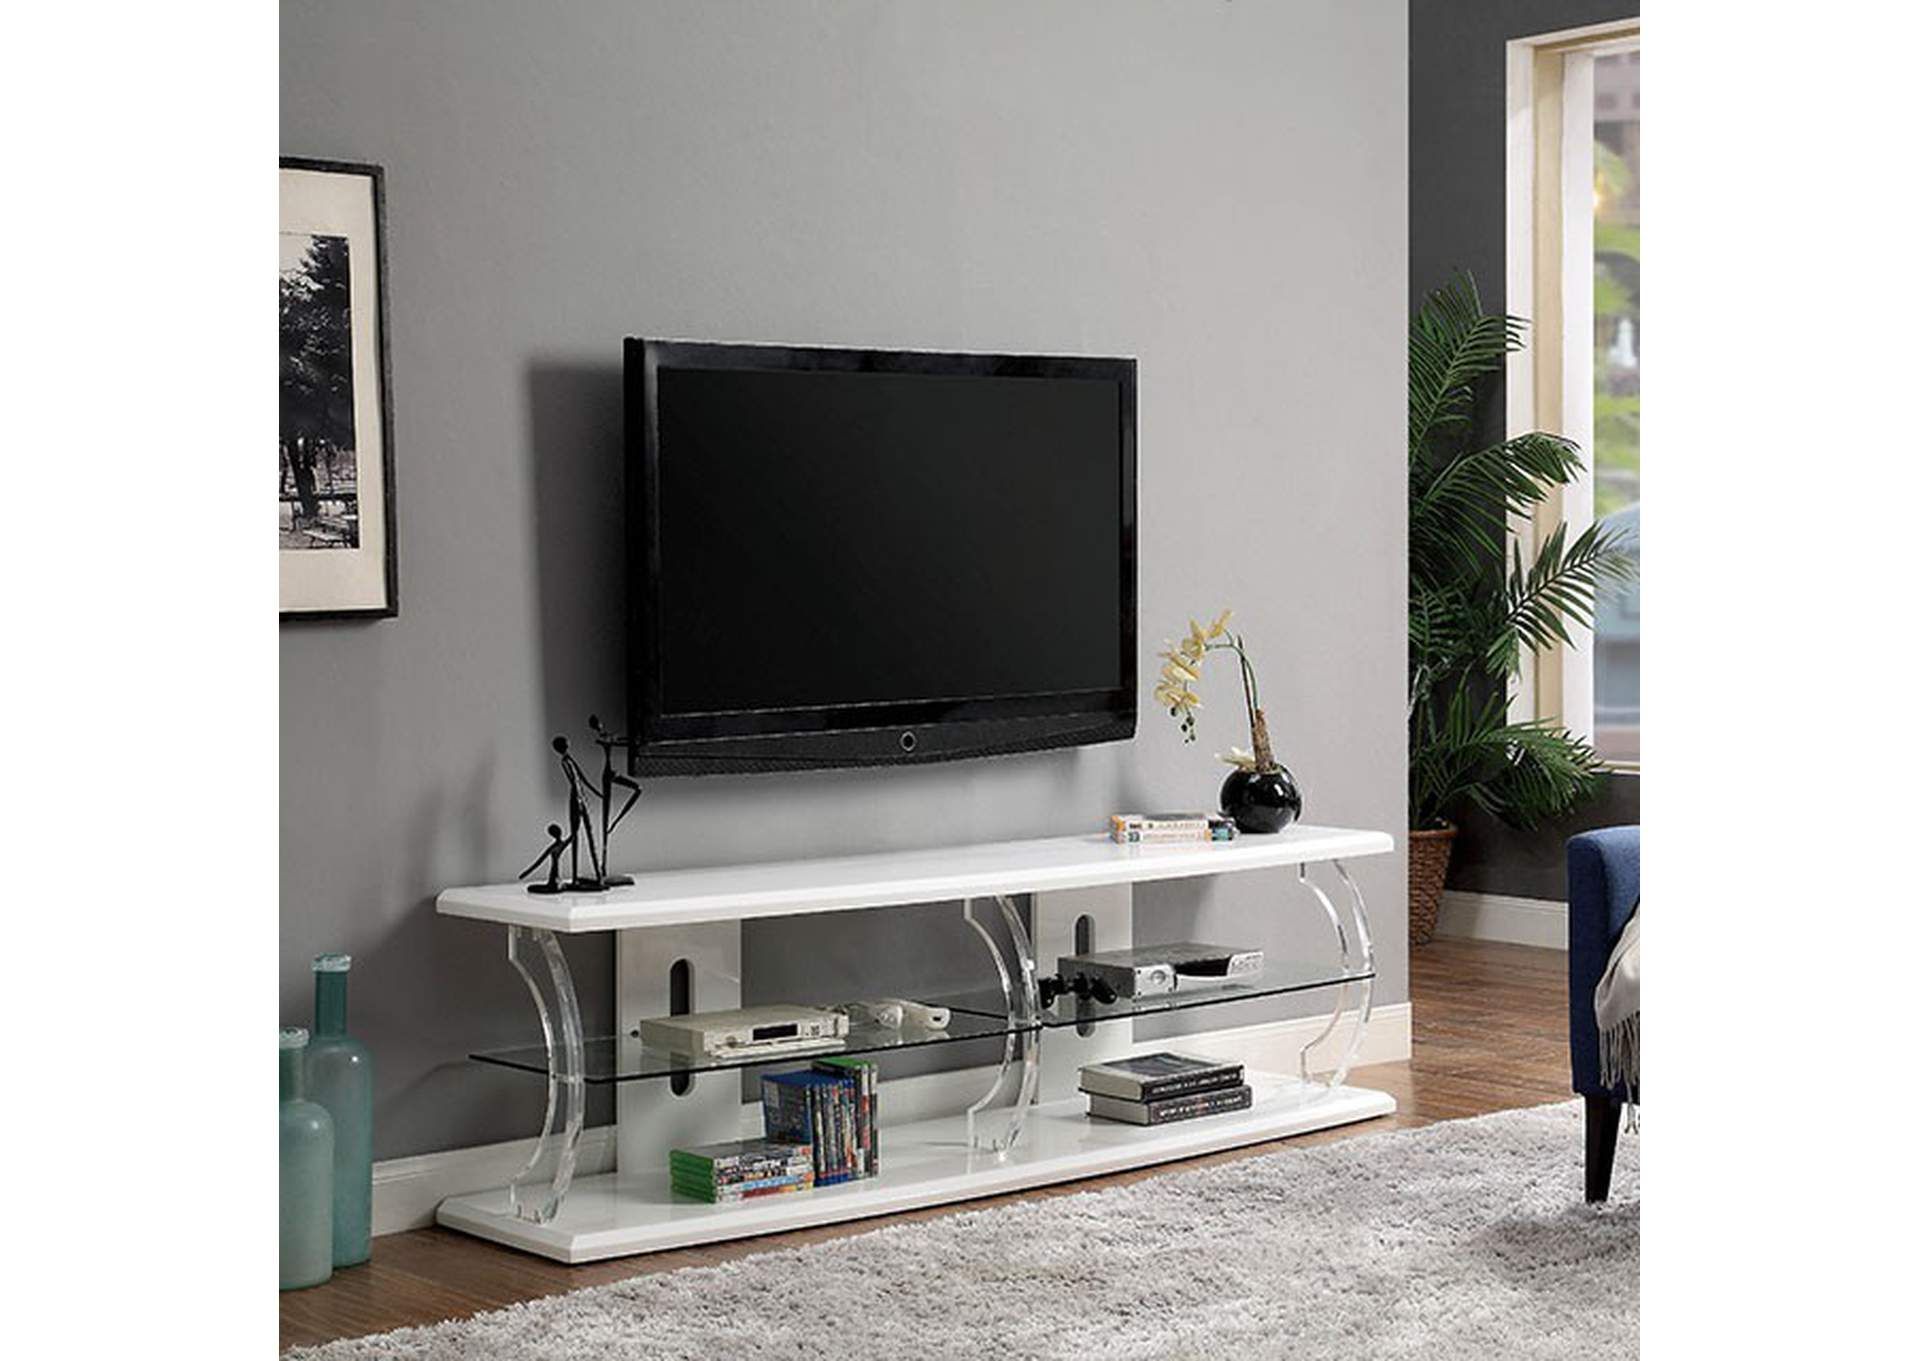 Ernst 60" Tv Stand Dimensional Furniture Outlet Regarding Led Tv Stands With Outlet (View 14 of 20)